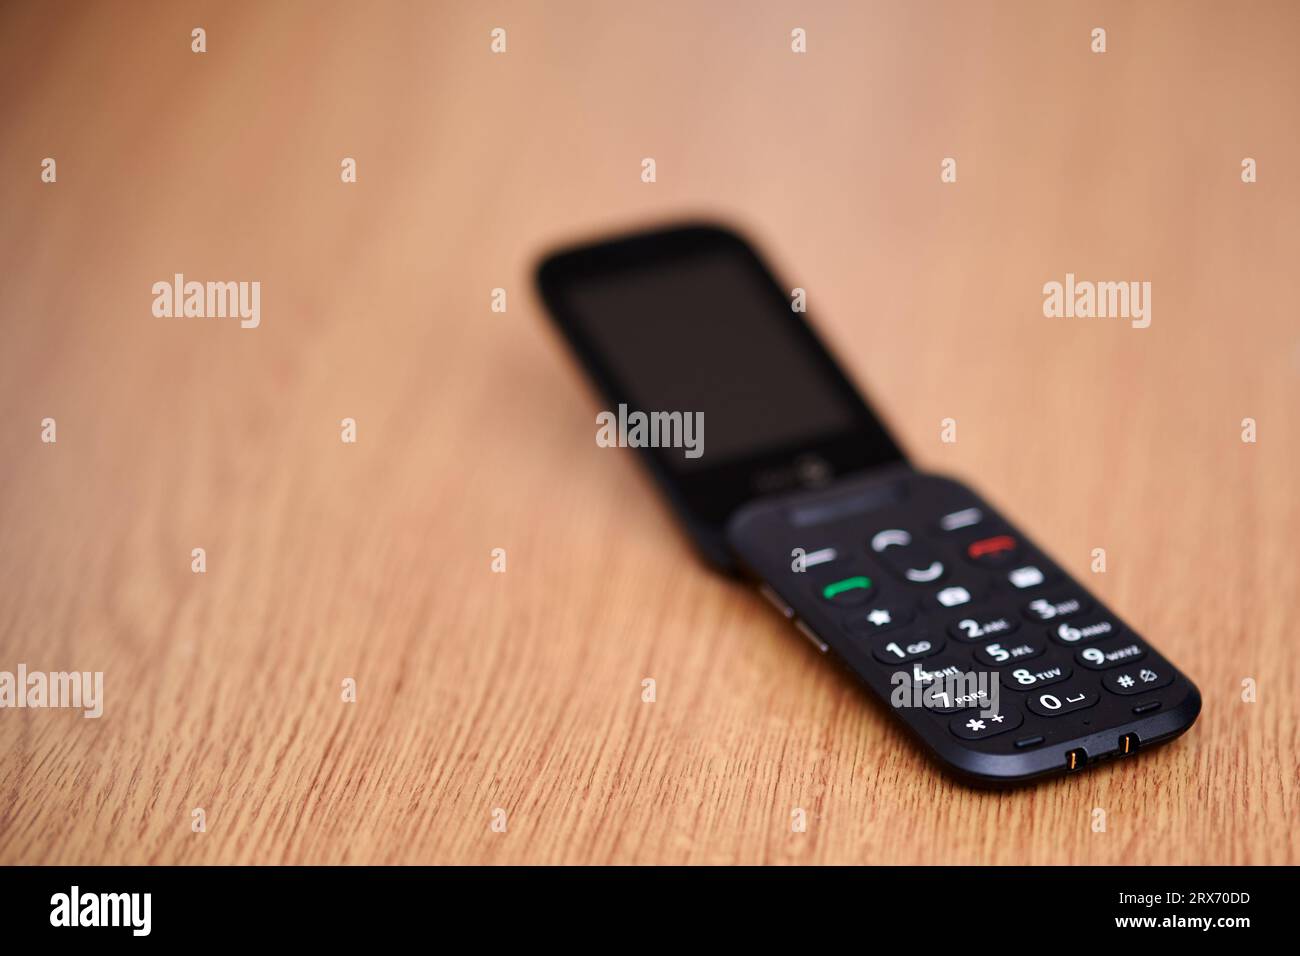 16 Sep 2023 - England  UK : Old style dumb mobile phone clam phone on wooden table Stock Photo